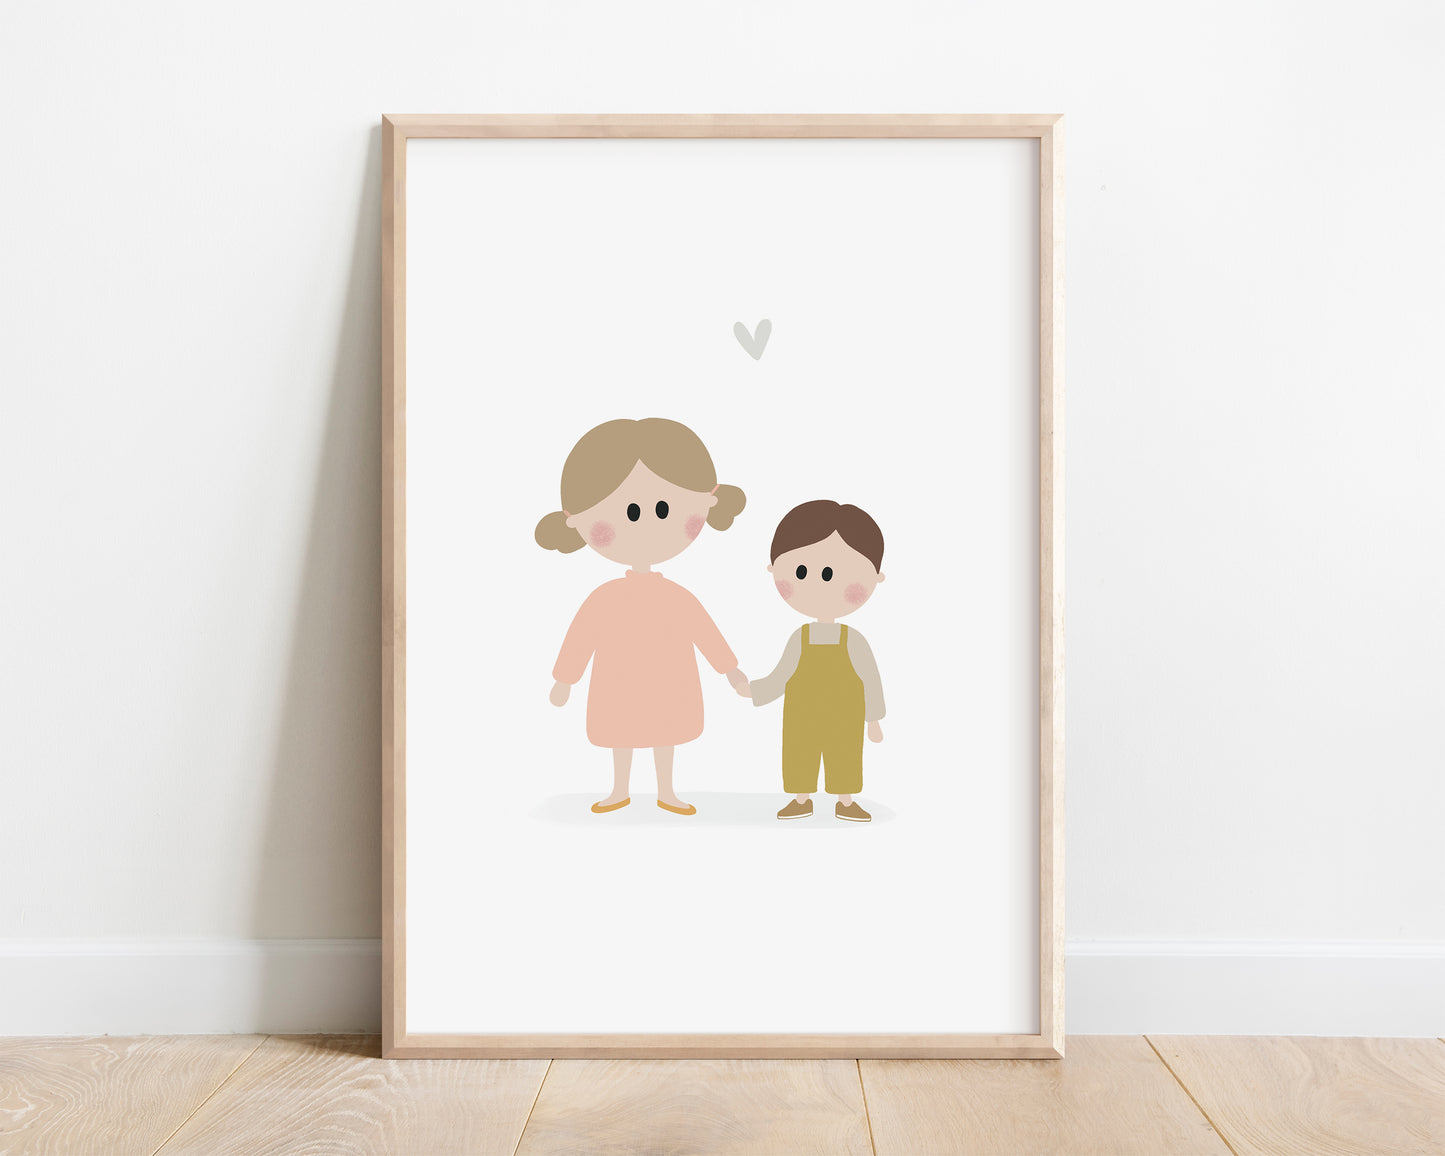 A beautifully illustrated art print featuring a little sister and her younger brother. This poster certainly brings joy and tenderness to your walls with soft pastel colors.